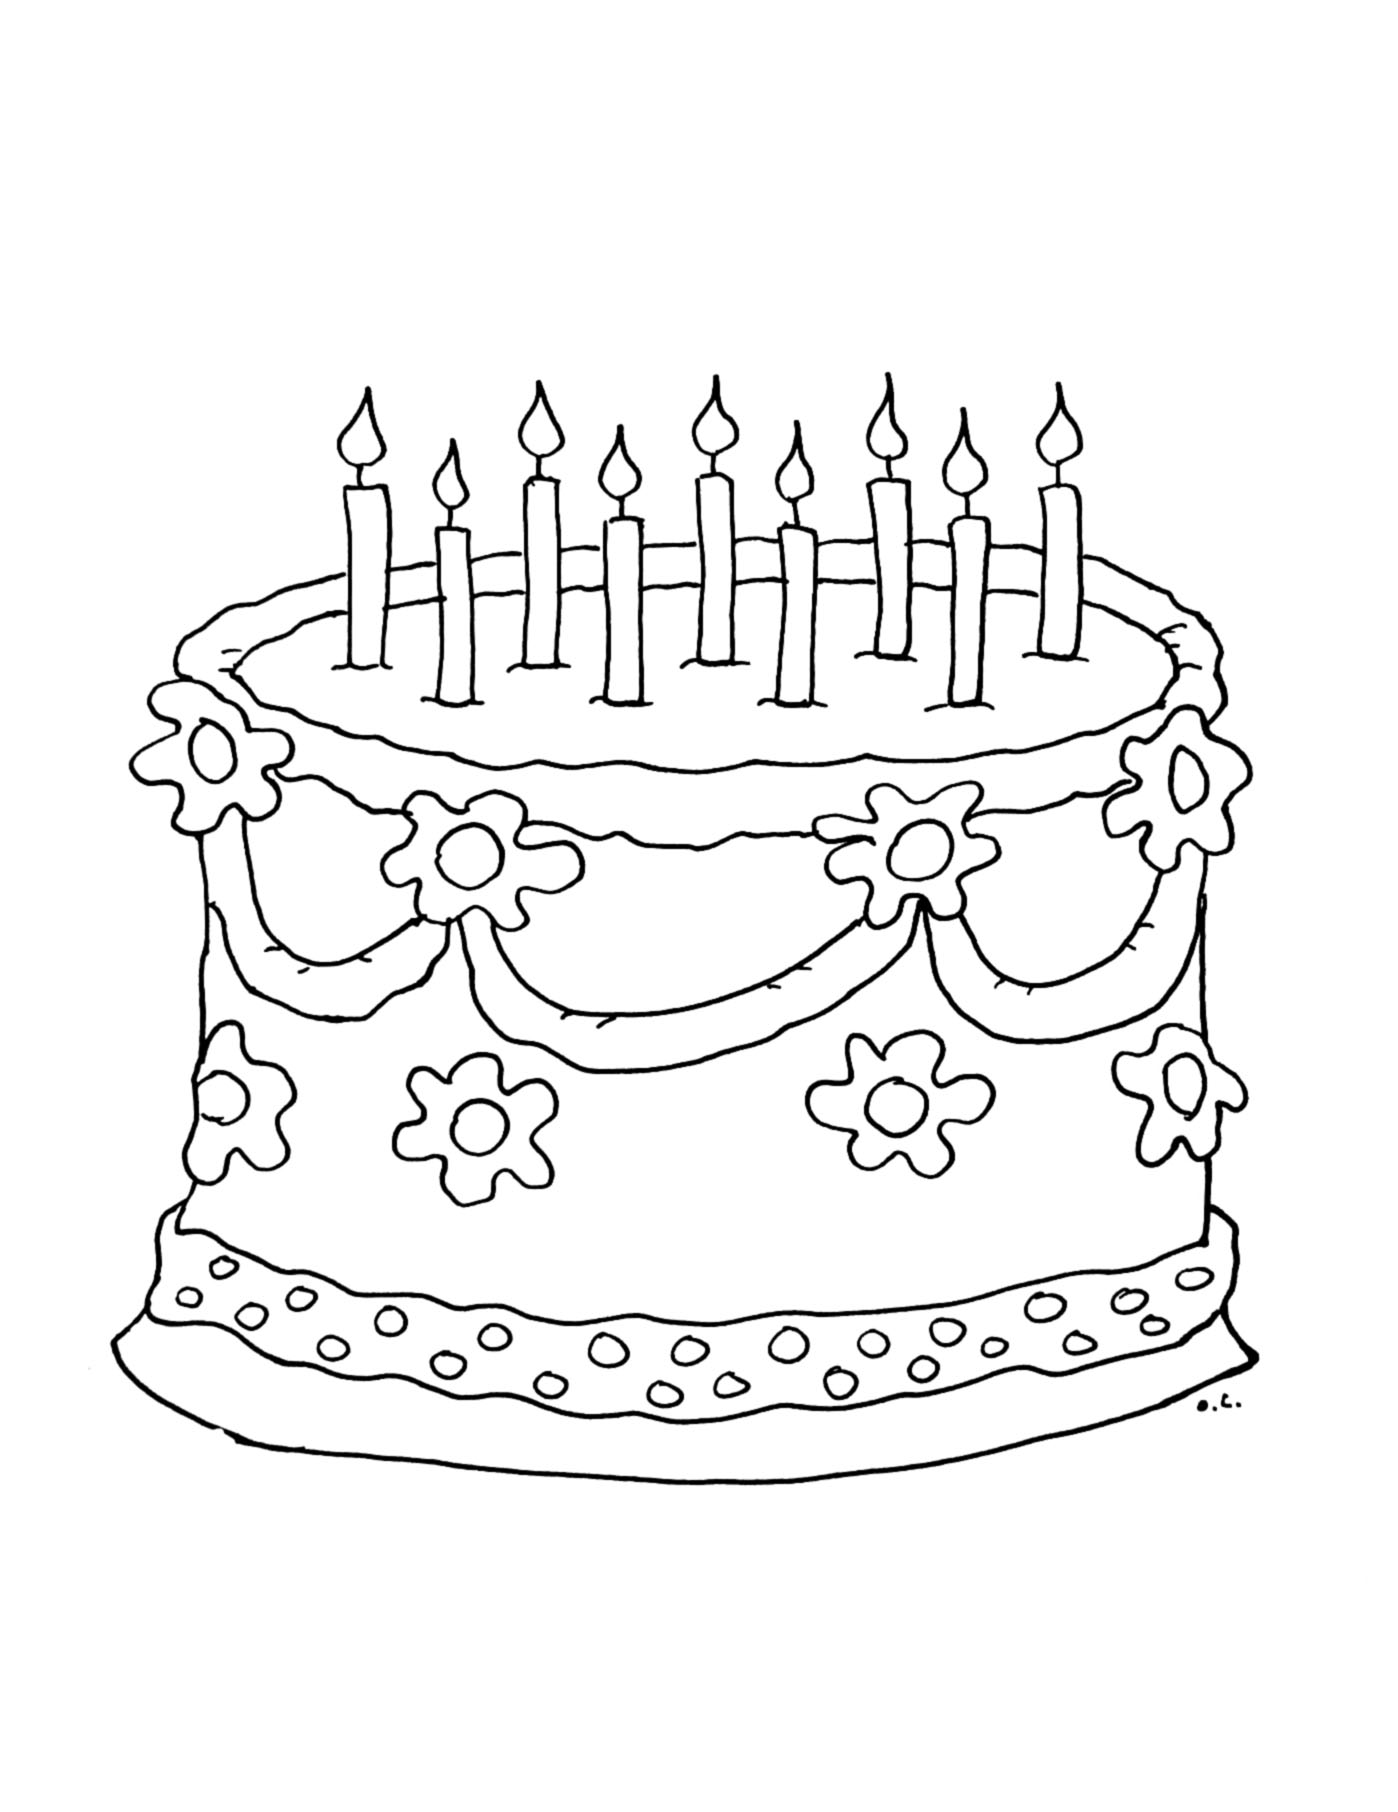 Birthday picture to download and color - Birthdays Kids Coloring Pages